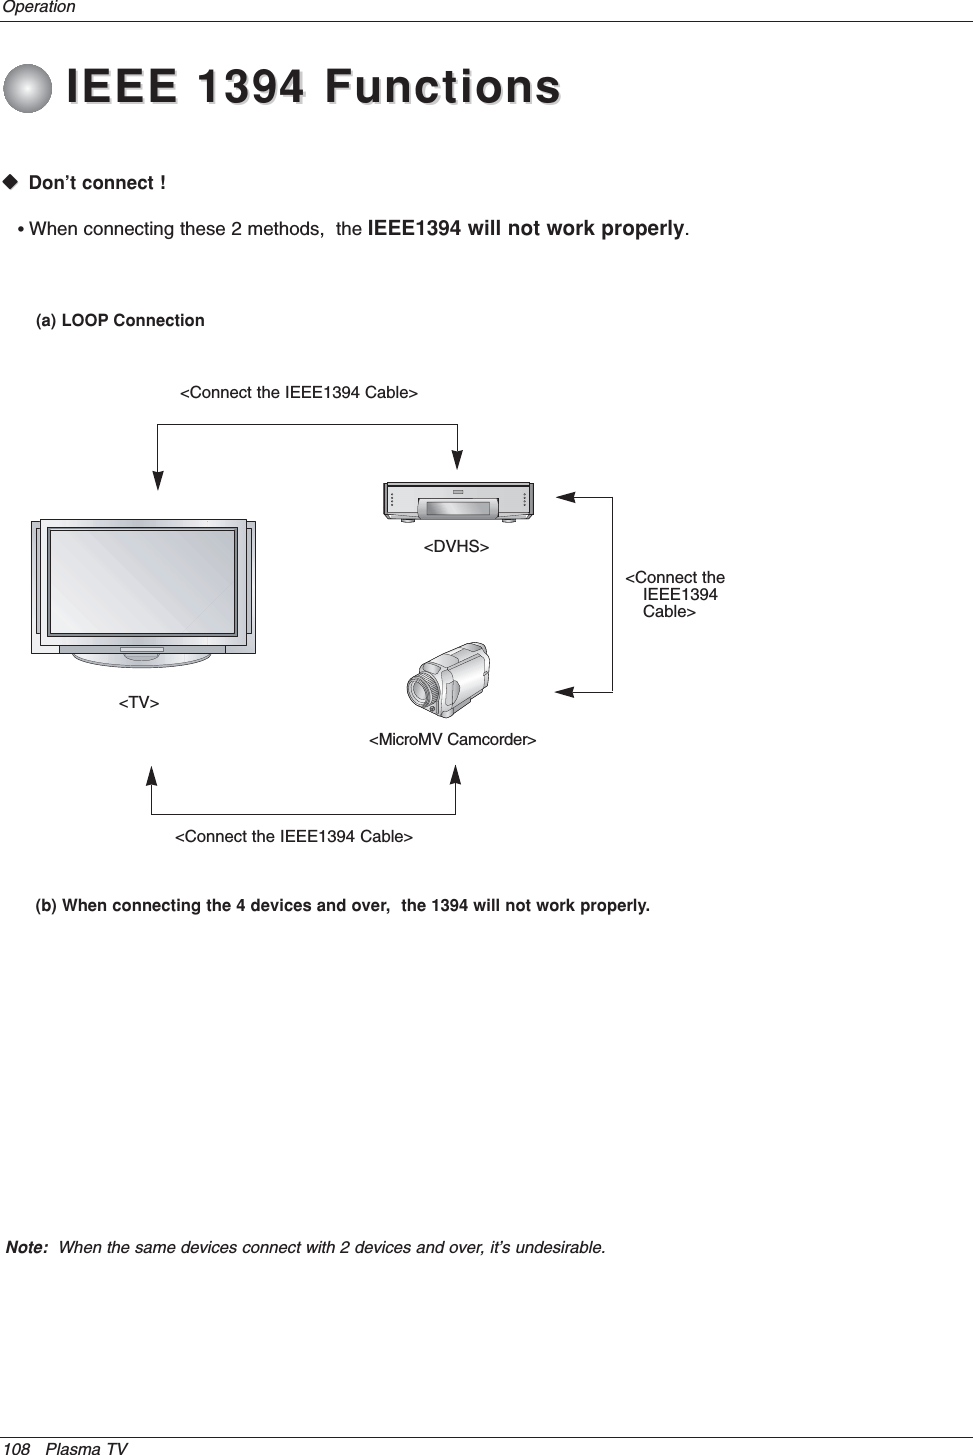 108 Plasma TVOperationWWVDon’t connect !•When connecting these 2 methods,  the IEEE1394 will not work properly.(a) LOOP Connection&lt;Connect the IEEE1394 Cable&gt;&lt;TV&gt;&lt;DVHS&gt;&lt;MicroMV Camcorder&gt;&lt;Connect the IEEE1394 Cable&gt;&lt;Connect theIEEE1394Cable&gt;(b) When connecting the 4 devices and over,  the 1394 will not work properly. Note: When the same devices connect with 2 devices and over, it’s undesirable.IEEE 1394 FunctionsIEEE 1394 Functions